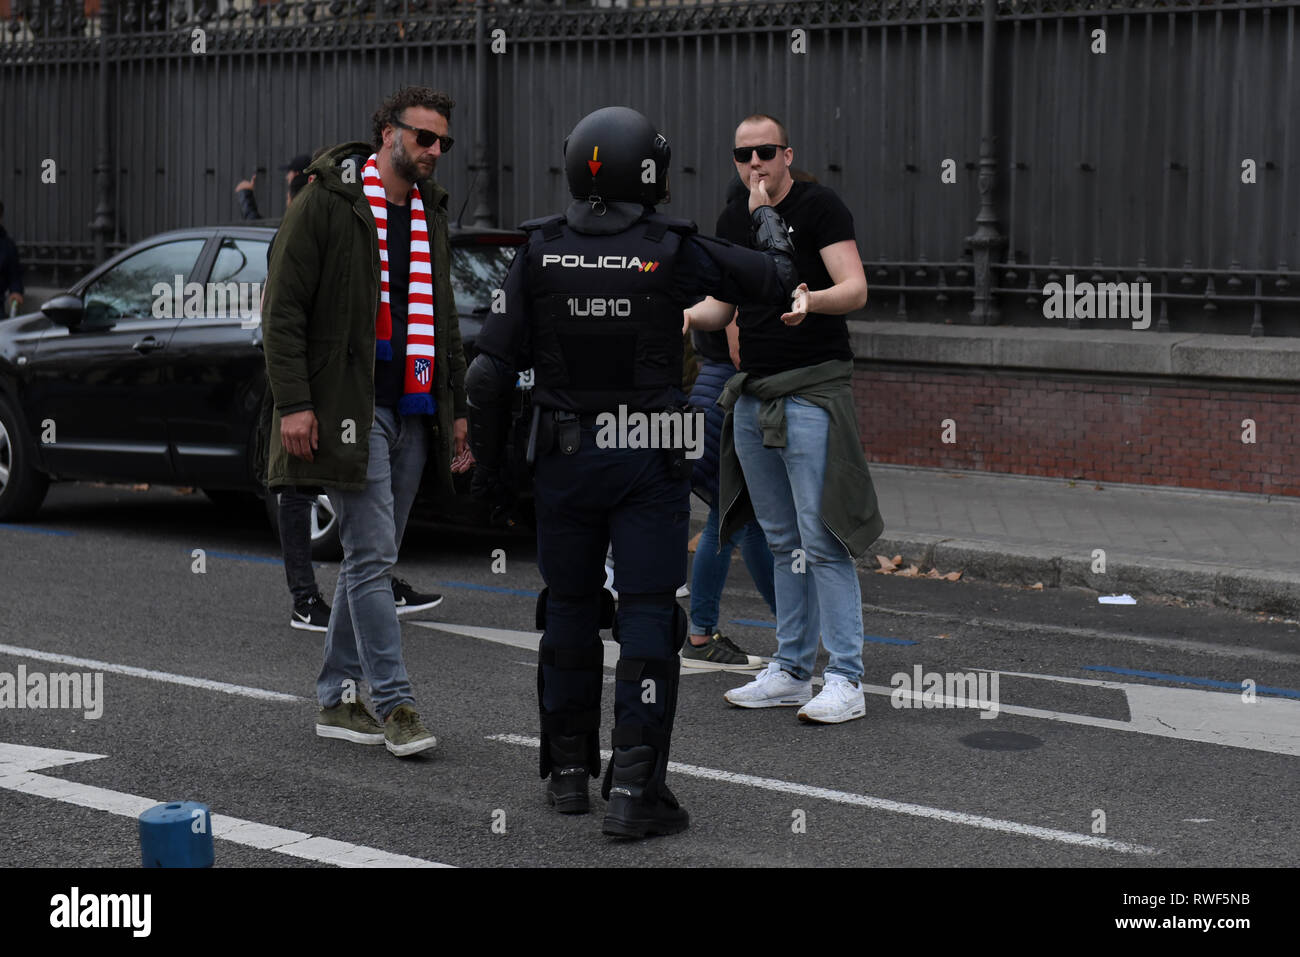 Ajax fans are seen speaking with the police officer in Madrid. Nearly 4,500 AJAX fans travelled to Madrid to watch the UEFA Champions League match between Real Madrid (Spain) and AJAX of Amsterdam (Holland). Supporters, who gathered at the squares in central Madrid prior the game, caused traffic cuts and threw bottles and beer cans to tourist buses. Stock Photo